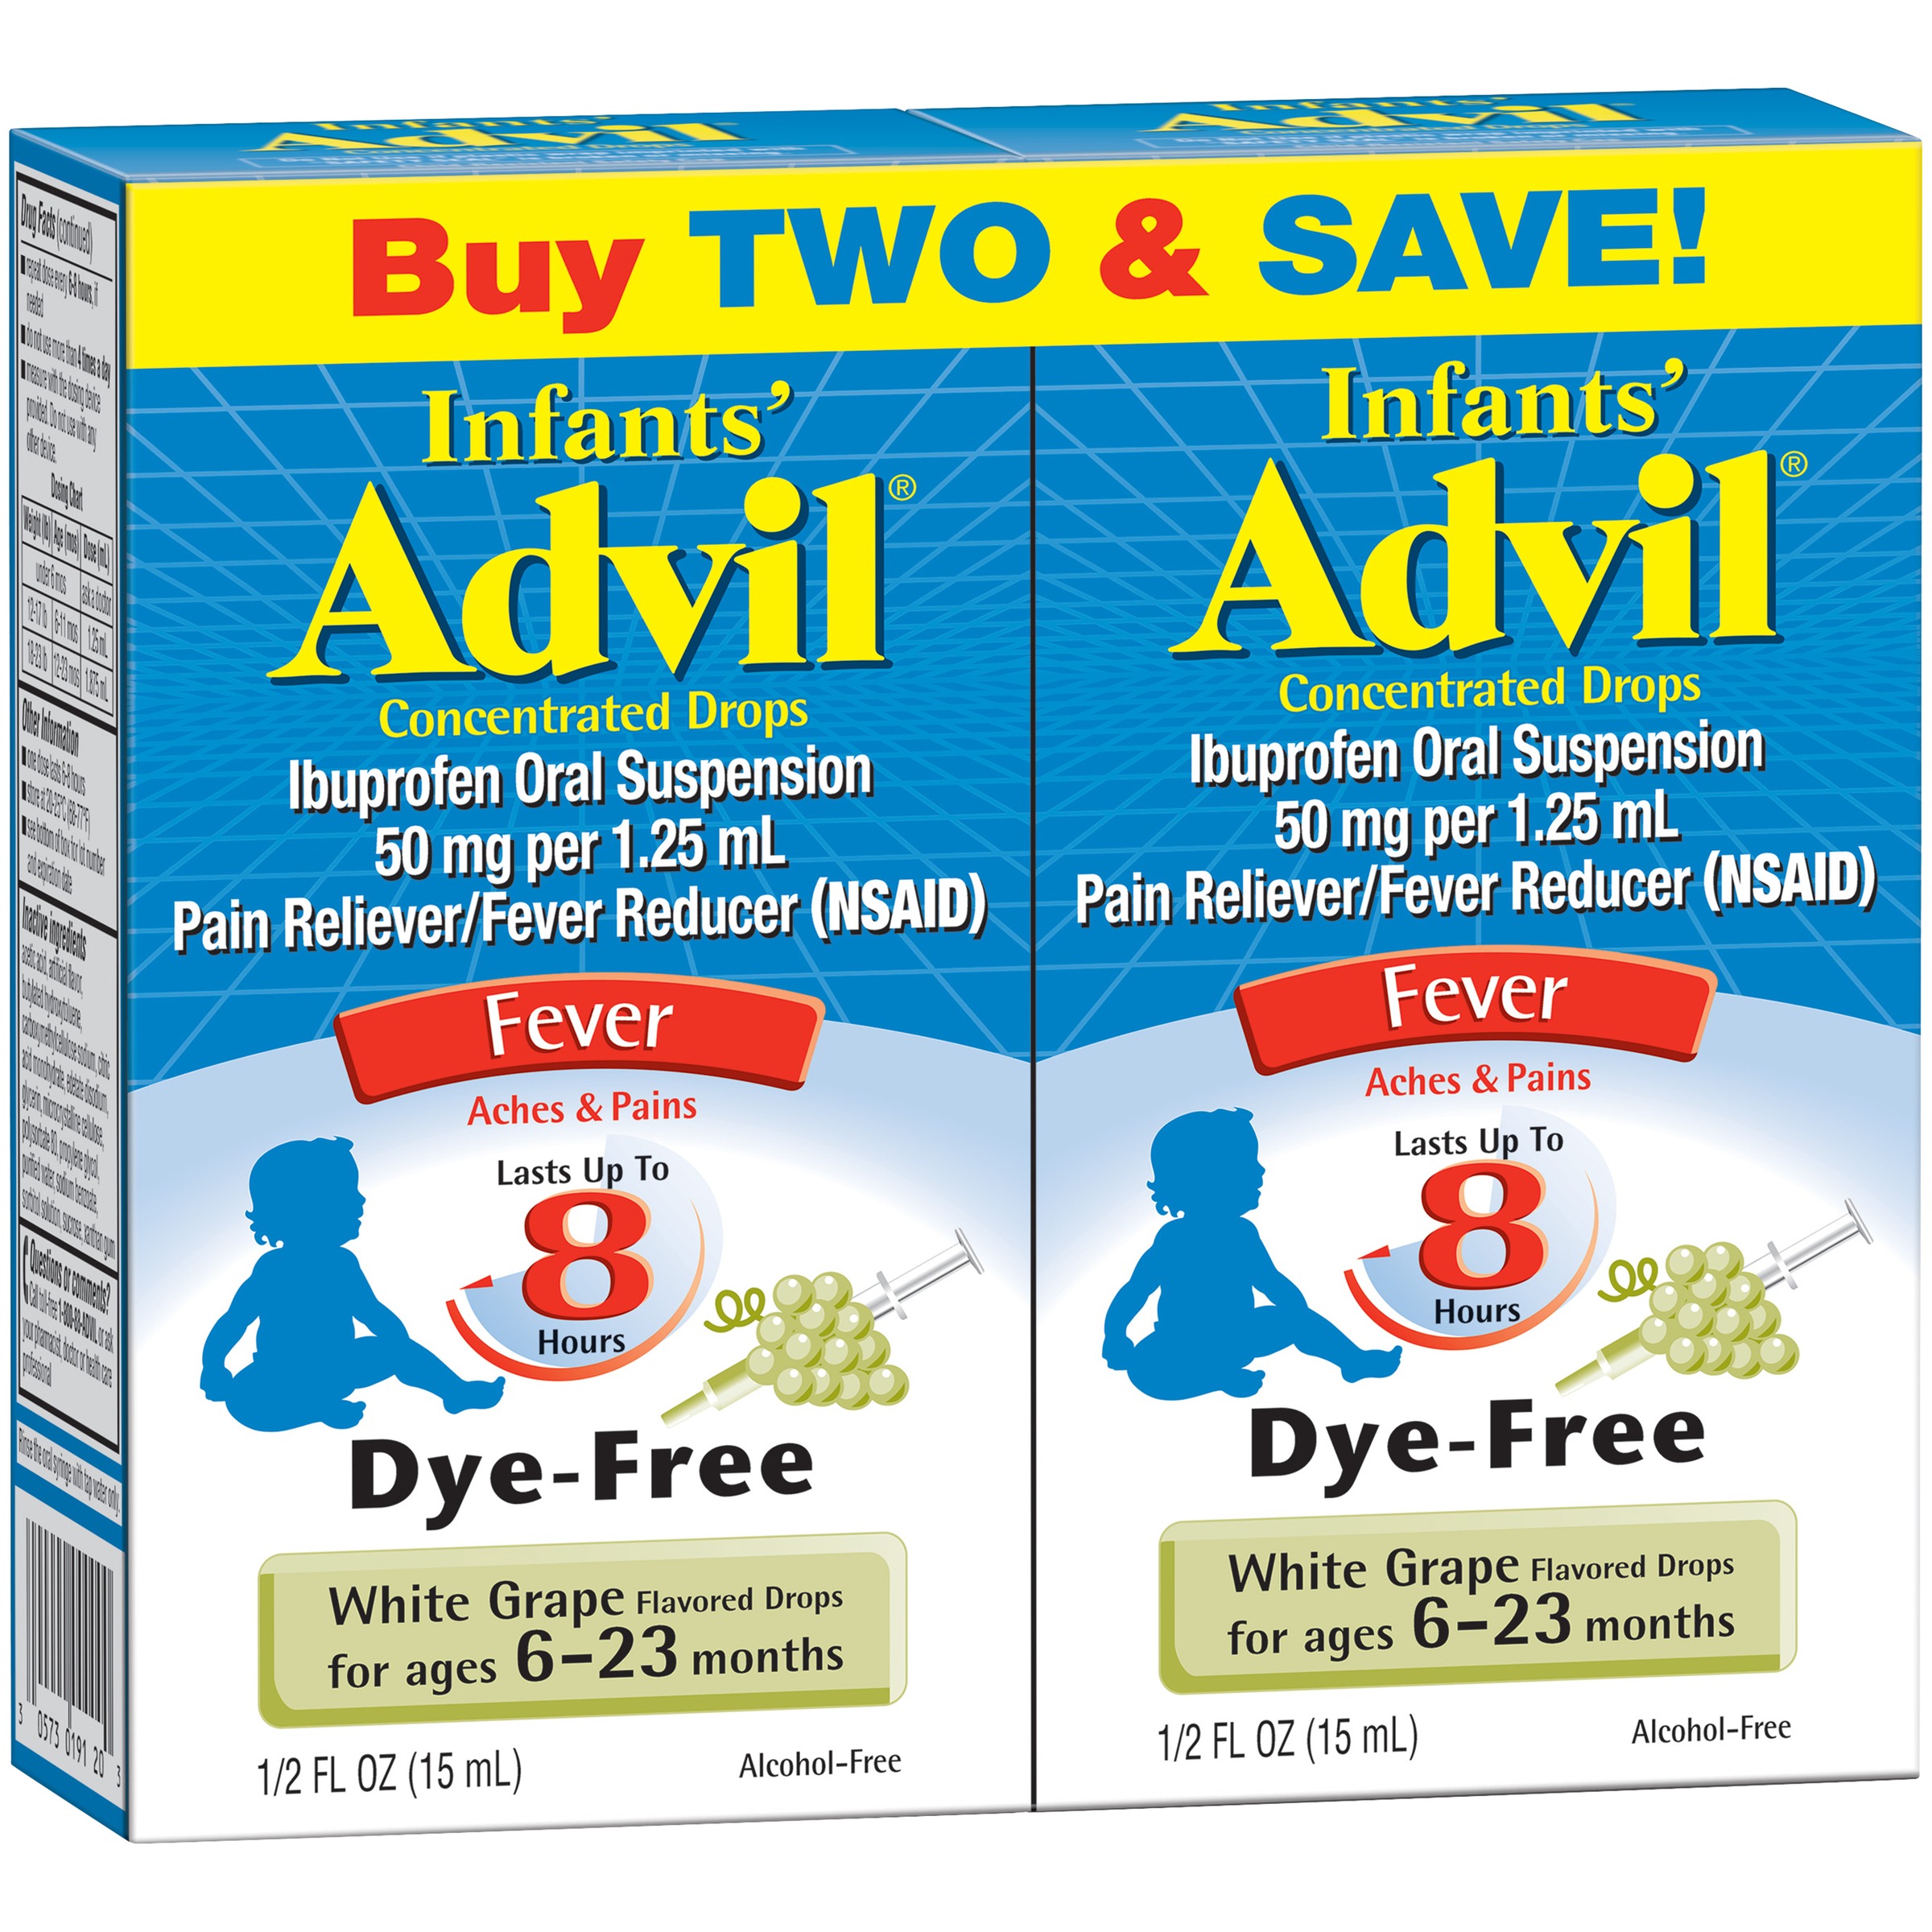 Infants' Advil® Concentrated Drops Fever Reducer/Pain Reliever (Ibuprofen) in Dye-Free White Grape Flavor 50mg 2-0.5 fl. oz. Boxes - image 5 of 6